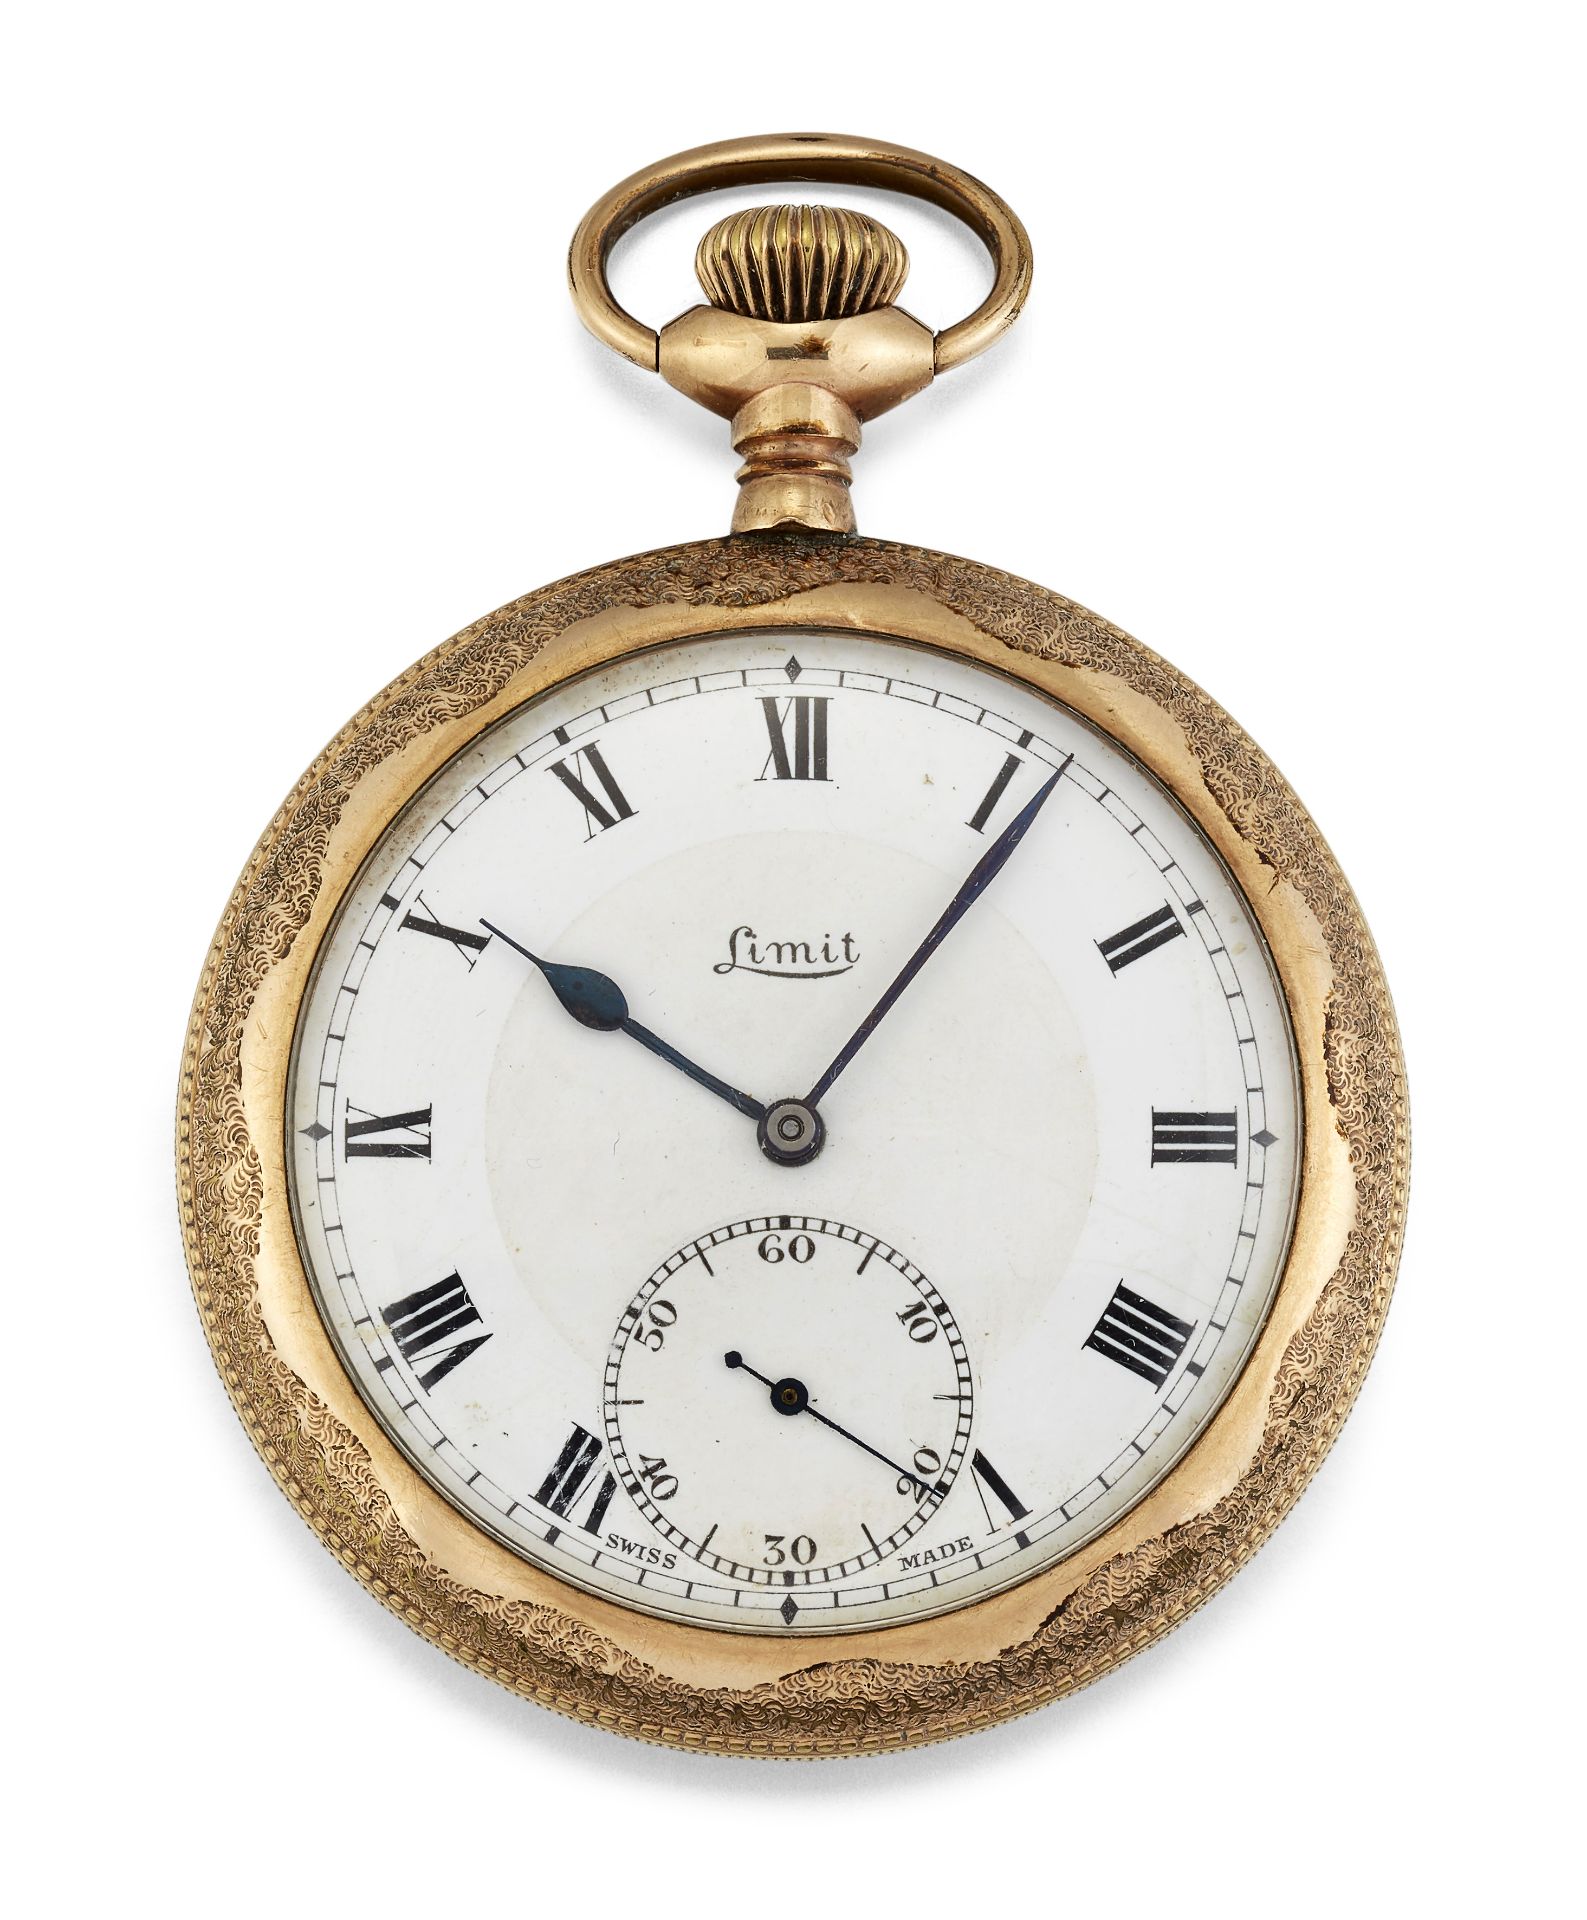 Gold Plated Limited Pocket Watch.